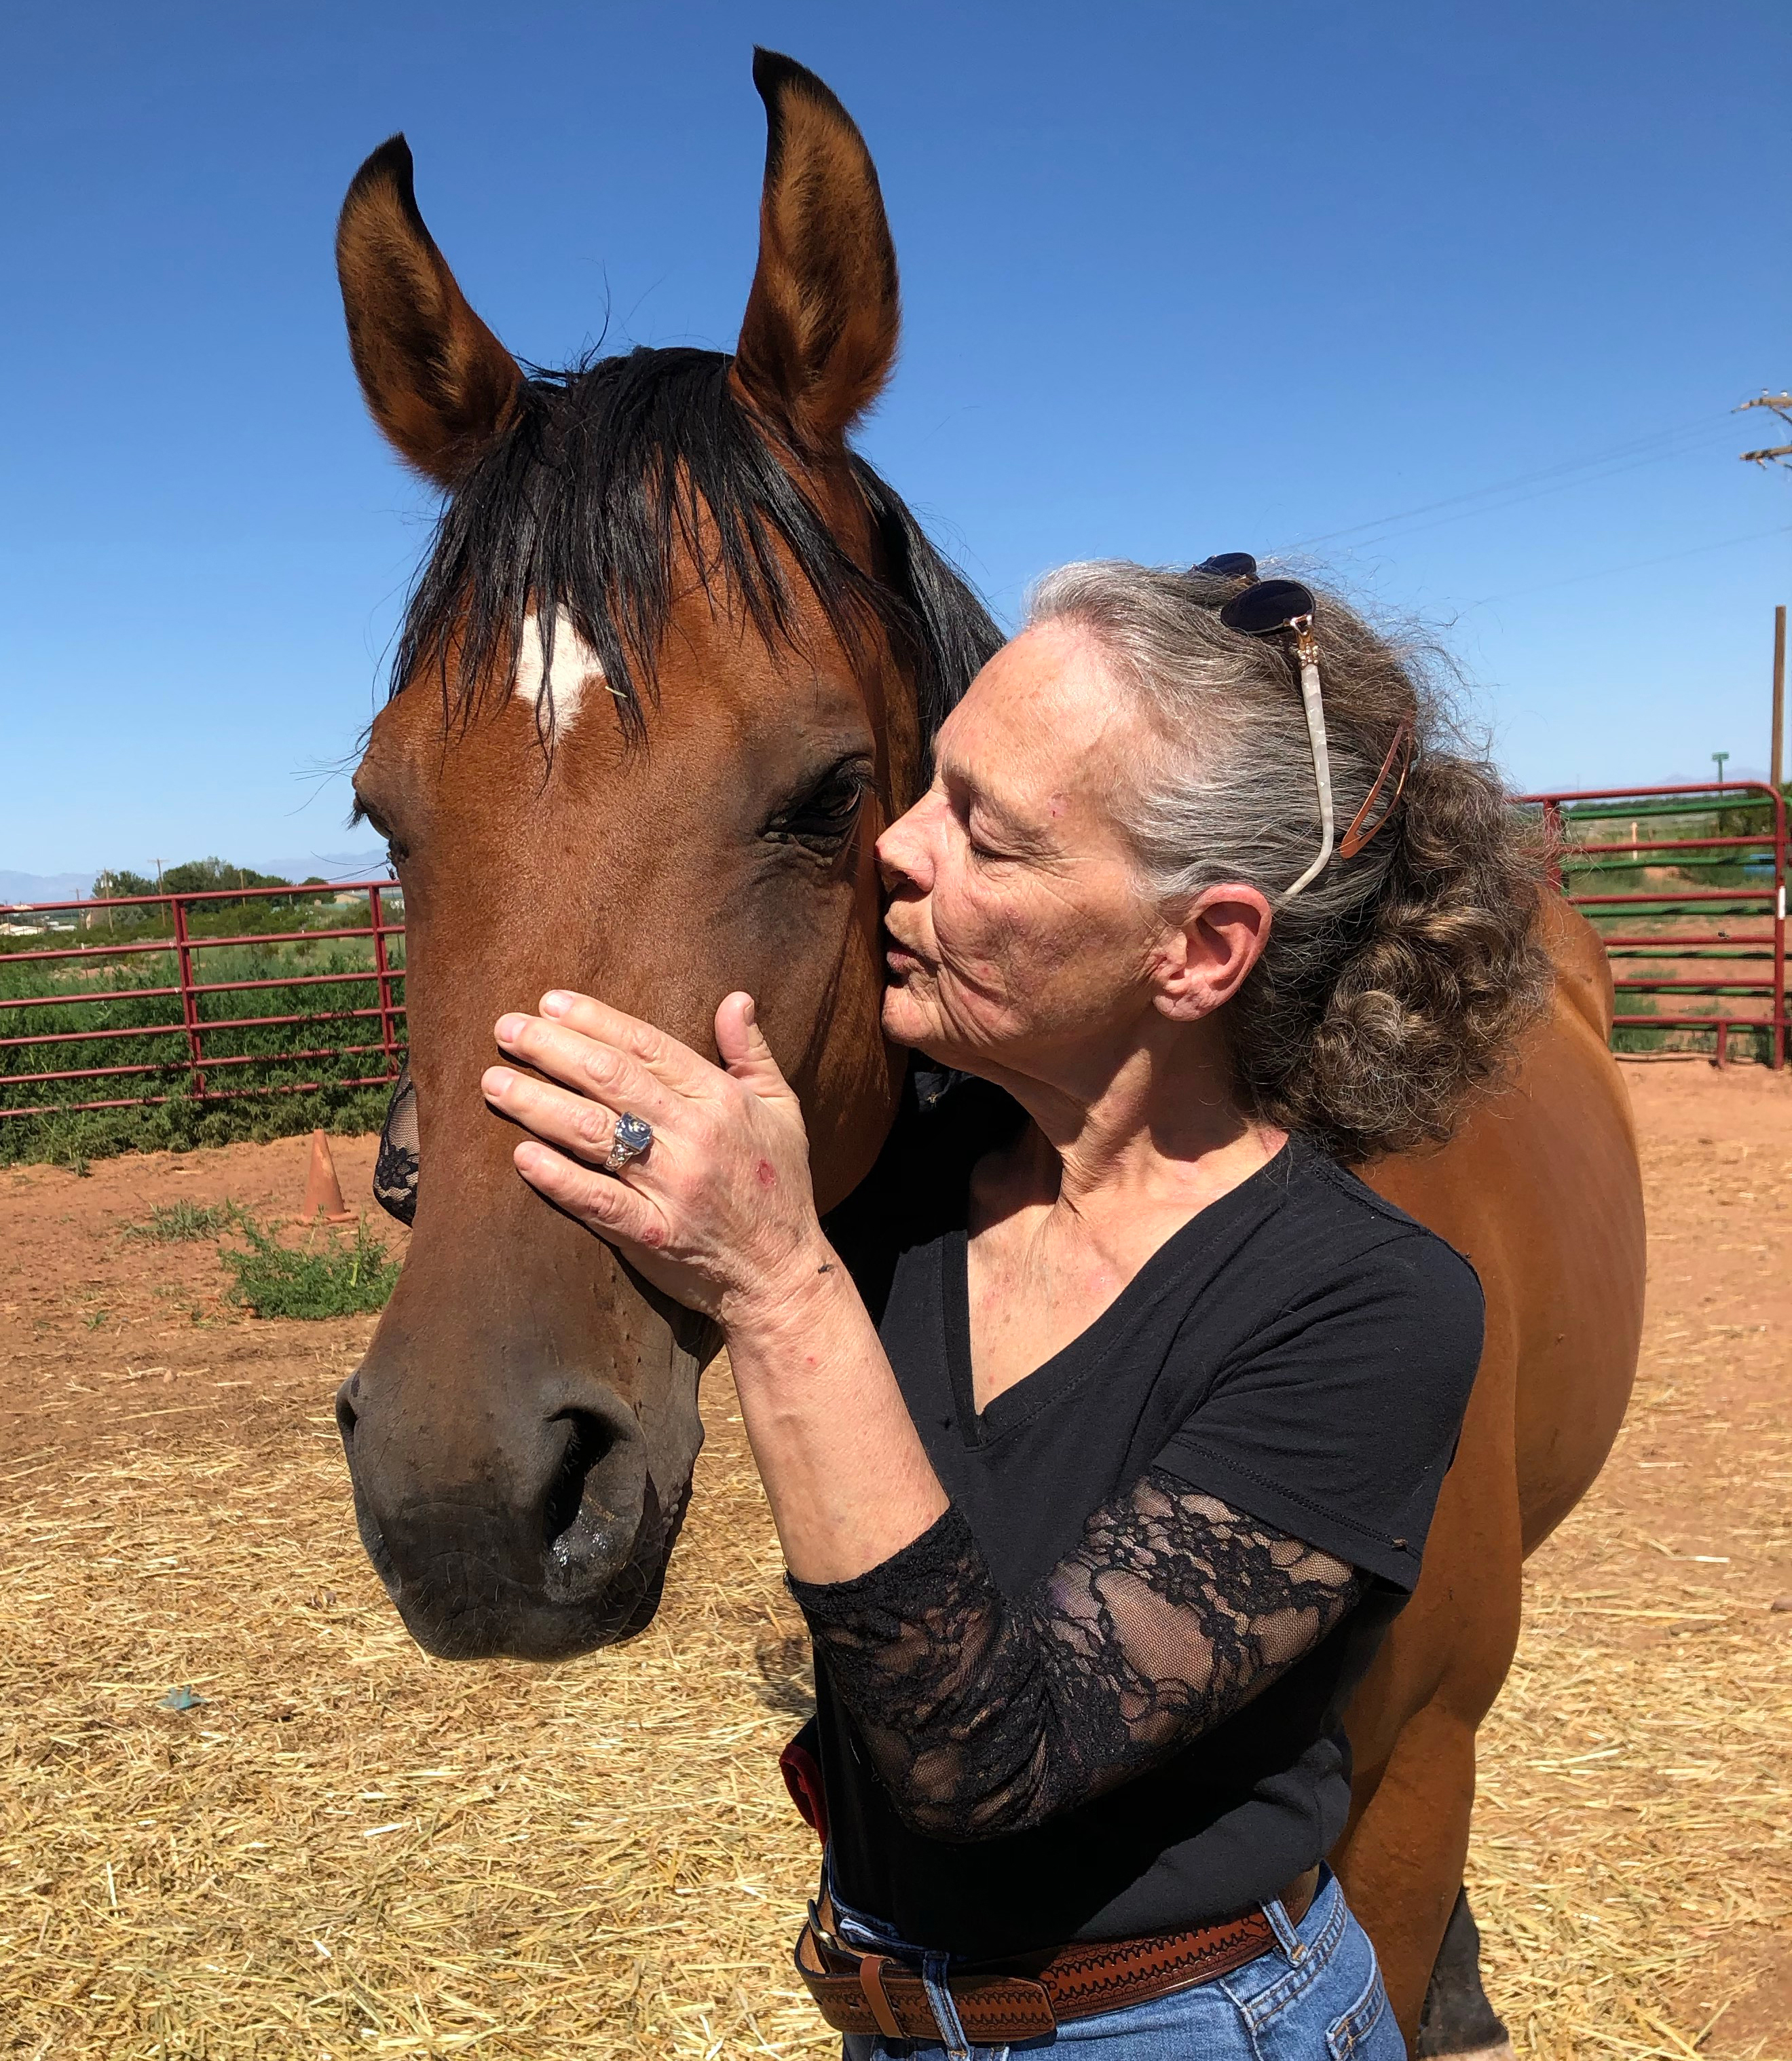 A photo shows Suzanne BeHanna posing for a photo with a horse.